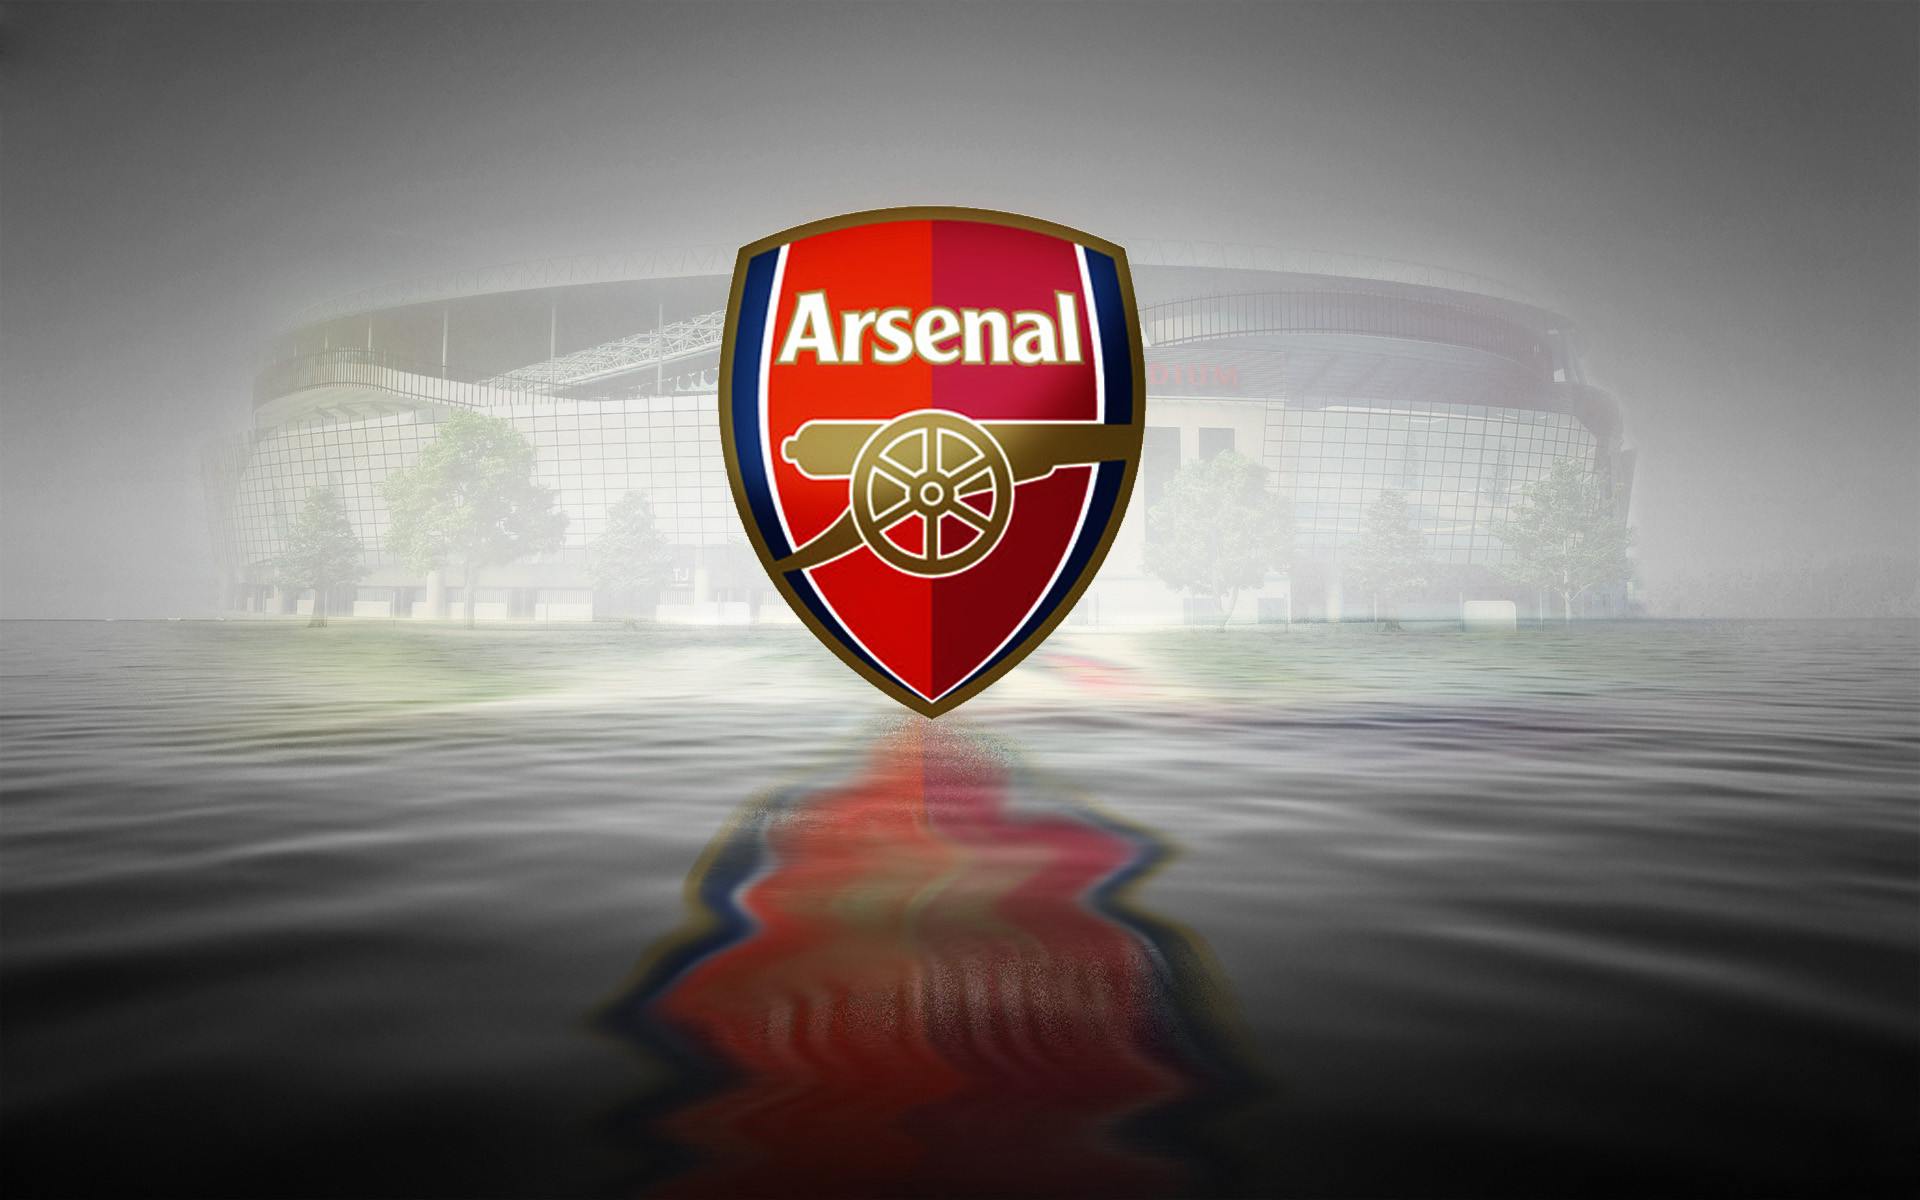 arsenal fc game schedule